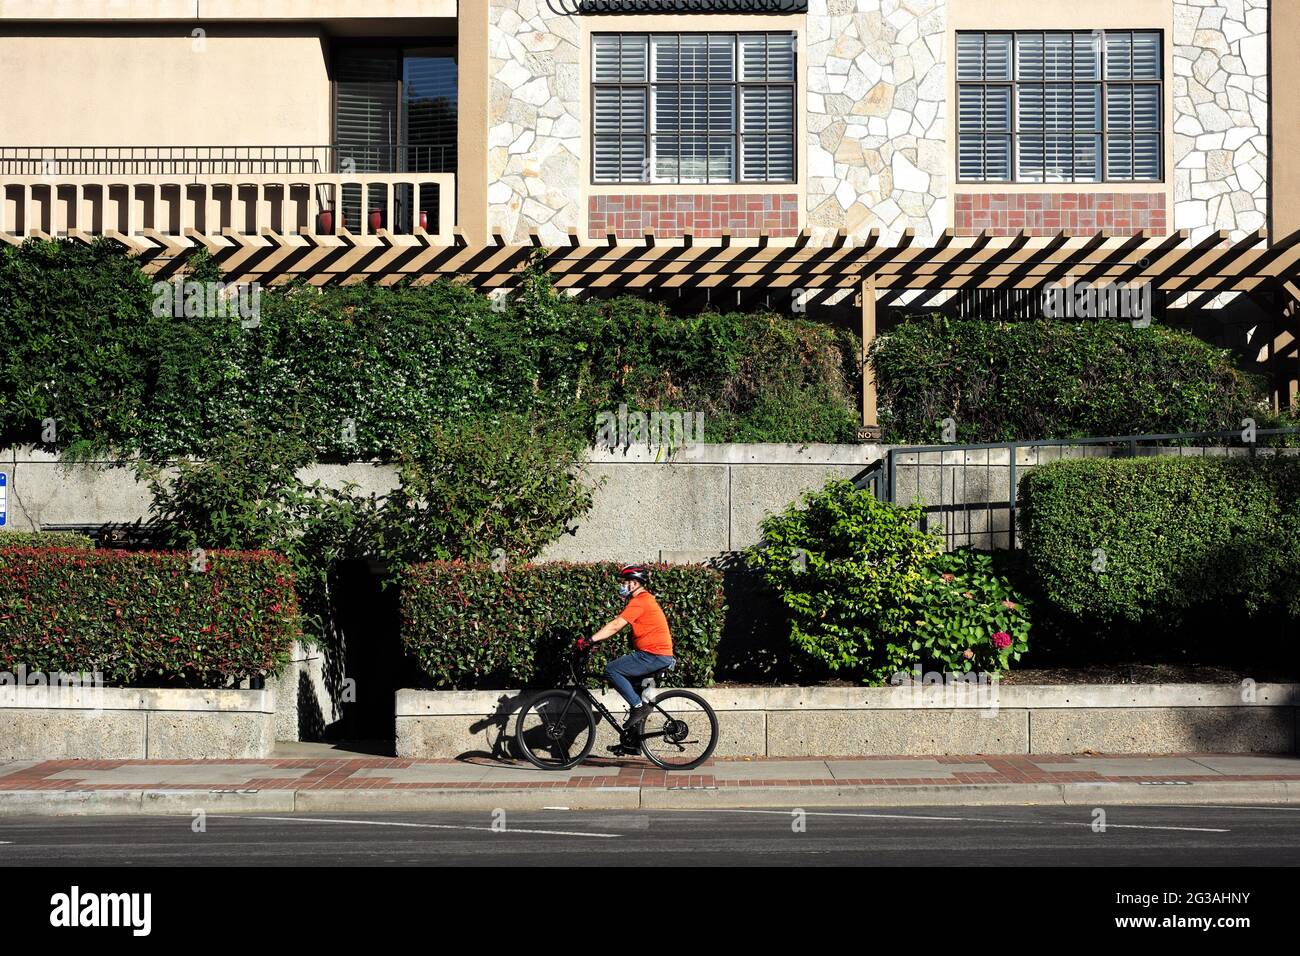 San Mateo, USA. 14th June, 2021. A man rides on the street in San Mateo, California, the United States, June 14, 2021. California Governor Gavin Newsom and government health officials announced the official reopening of the state from Tuesday following months of anticipation.The reopening means that vaccinated people in California can go maskless in public, there will be no more limitations on out-of-state travelers, and California retail businesses can go back to full capacity. Credit: Wu Xiaoling/Xinhua/Alamy Live News Stock Photo